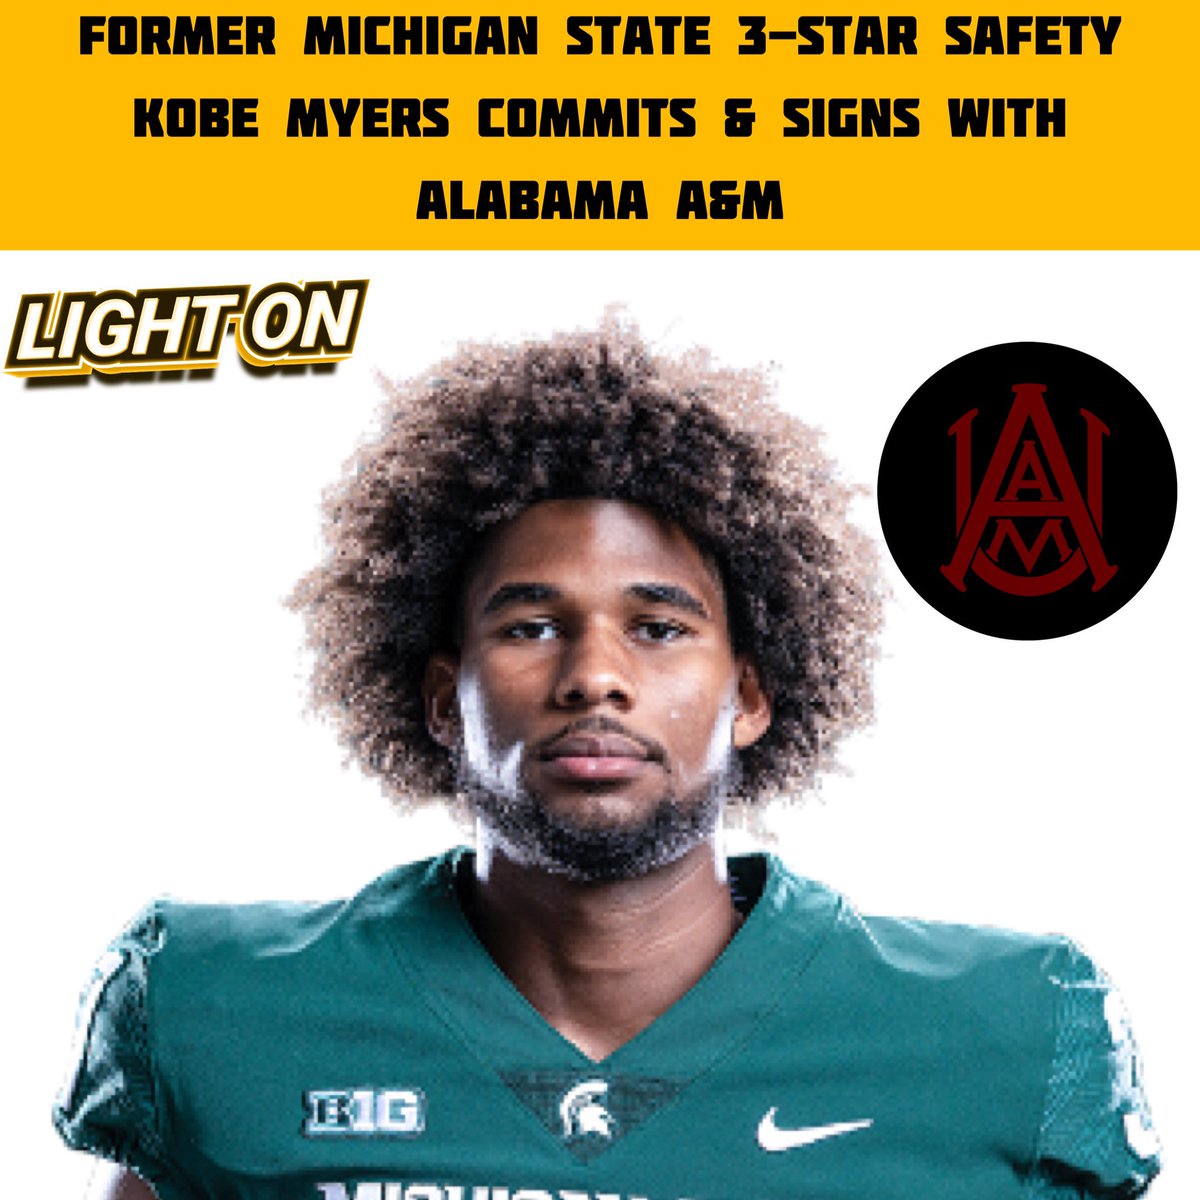 Former Michigan State 3⭐️ Safety Kobe Myers Has #Committed & #Signed With Alabama A&M, Per @AamufbR . @KobeMyers31